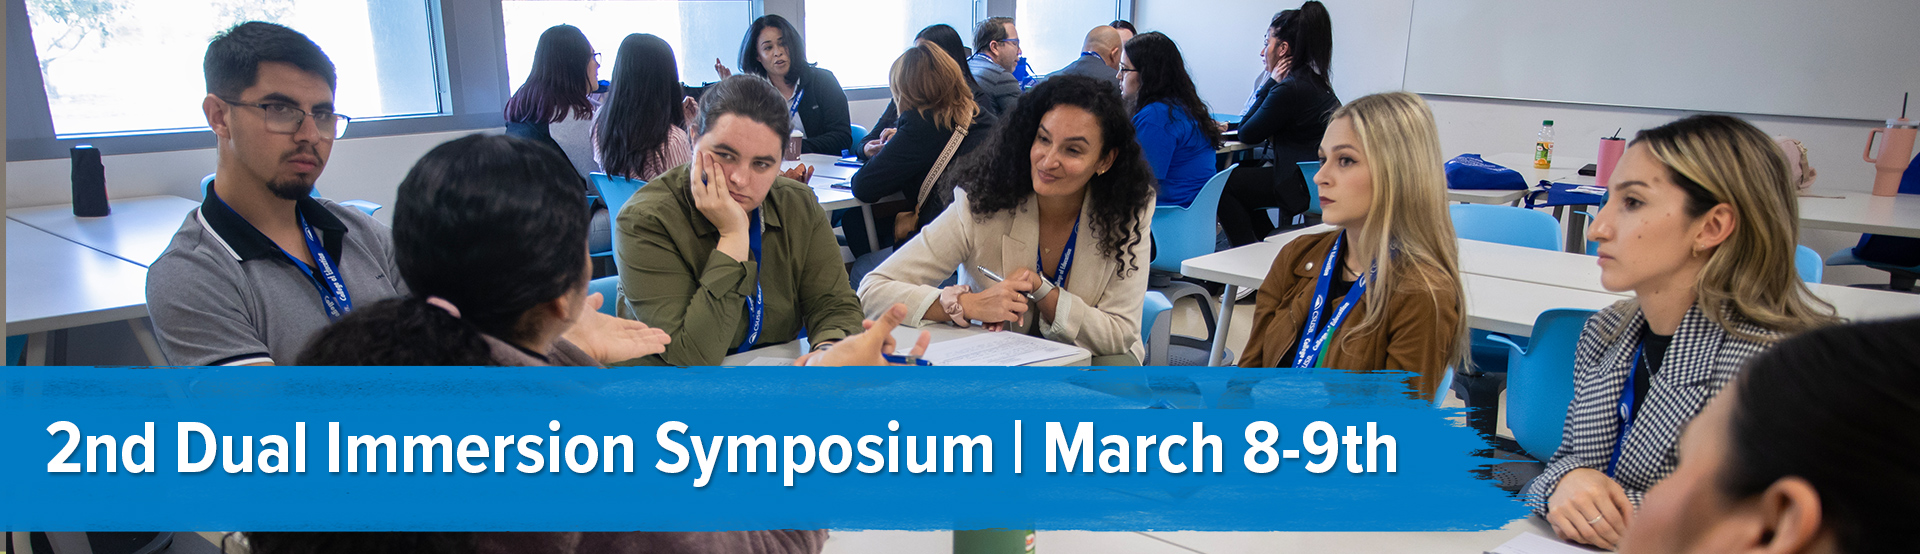 2nd Dual Immersion Symposium | March 8-9th